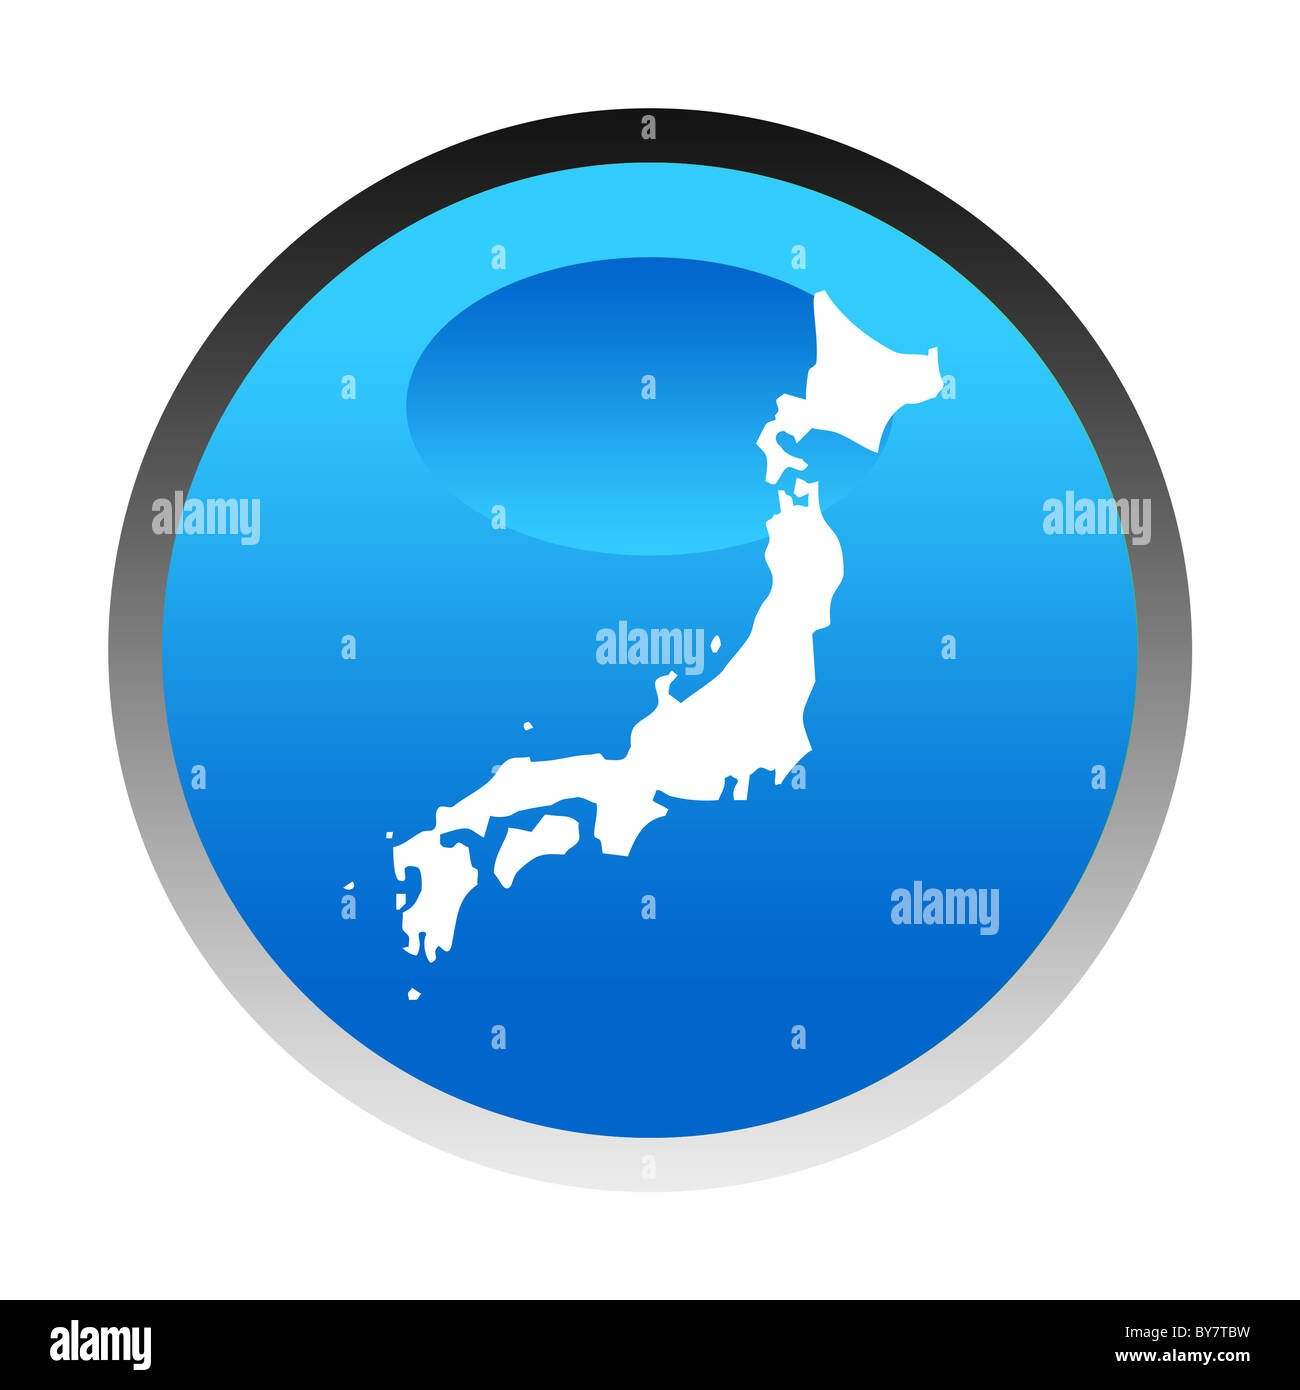 Japan map blue circular button isolated on white background. Stock Photo